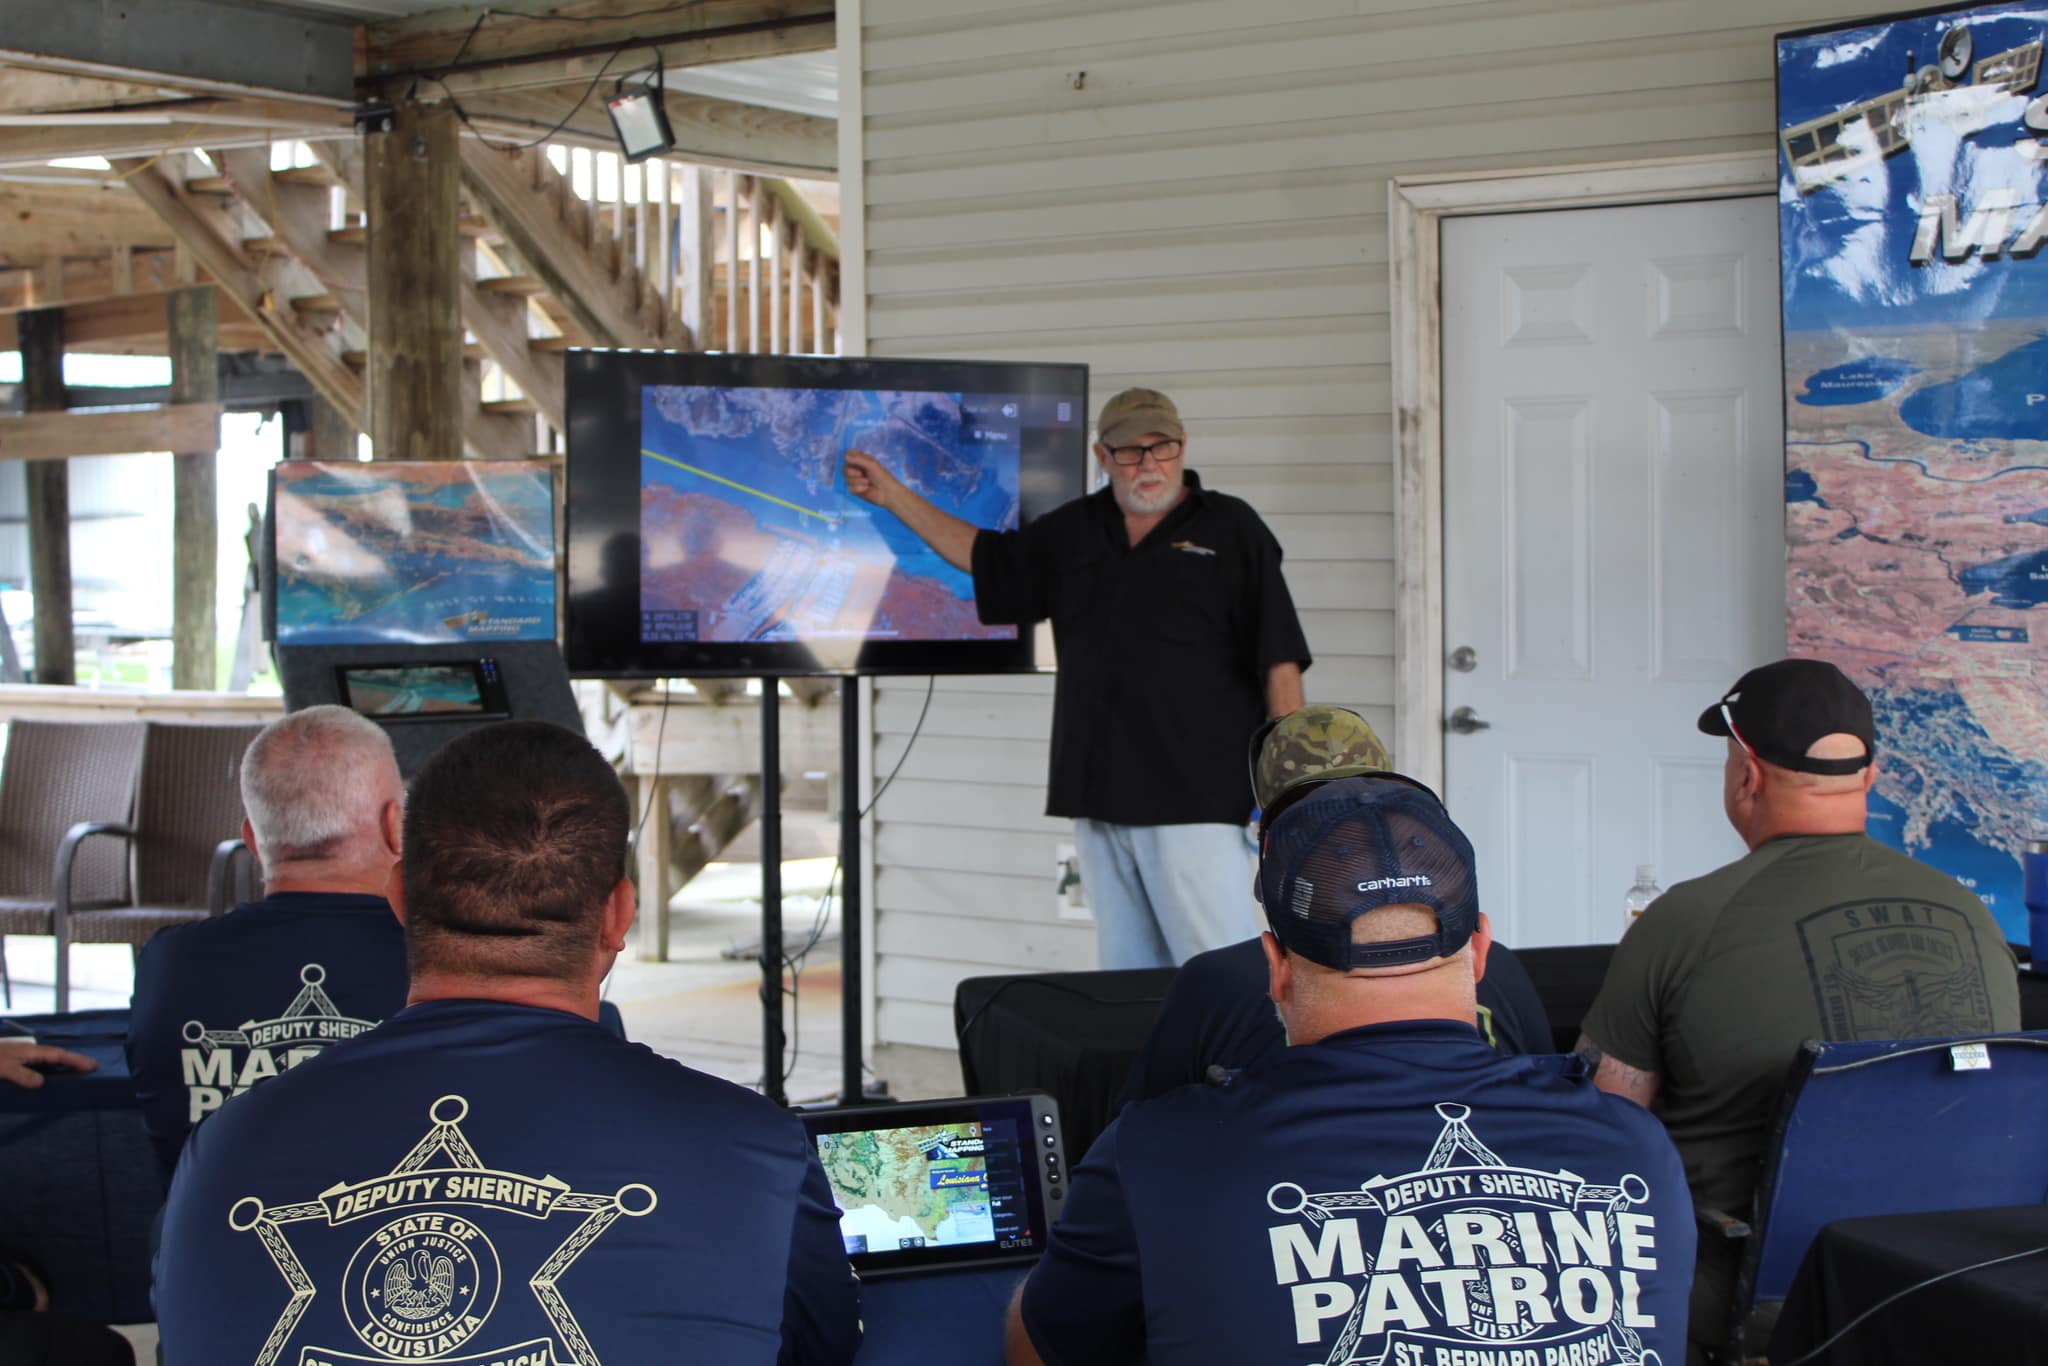 SBSO RECEIVES MARITIME NAVIGATIONAL TECH TRAINING

Sheriff James Pohlmann and members of the St. Be